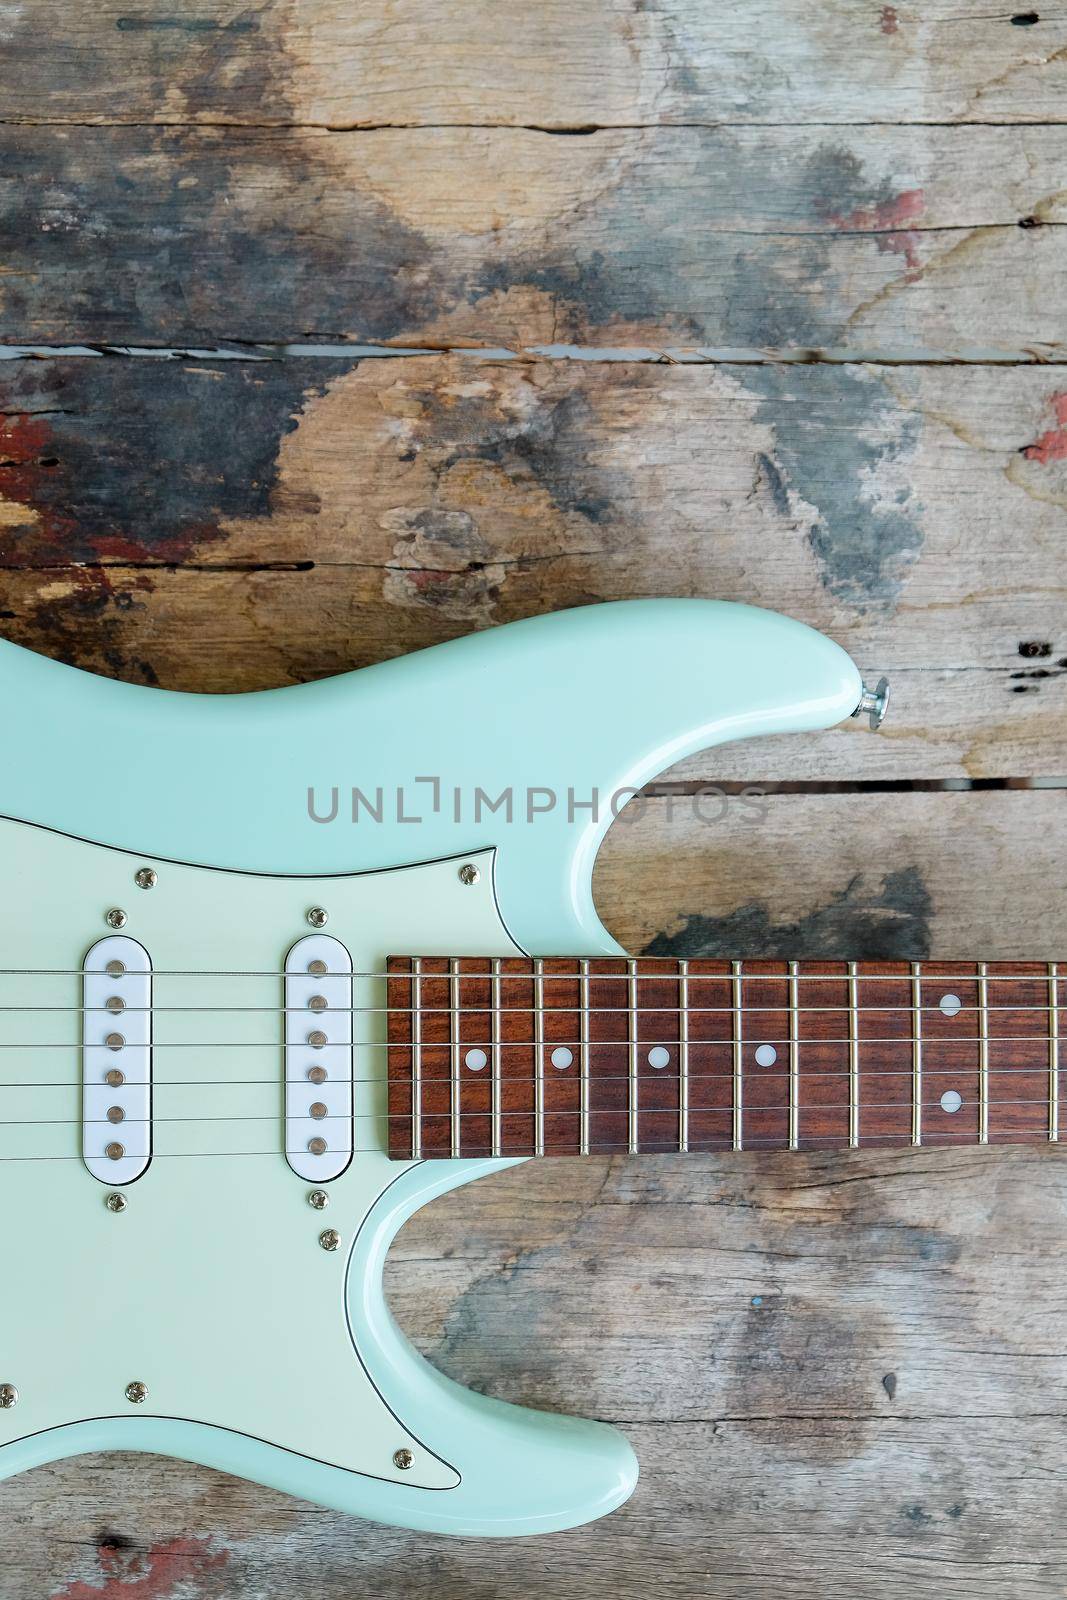 Mint Green Electric Guitar on a wood by ponsulak